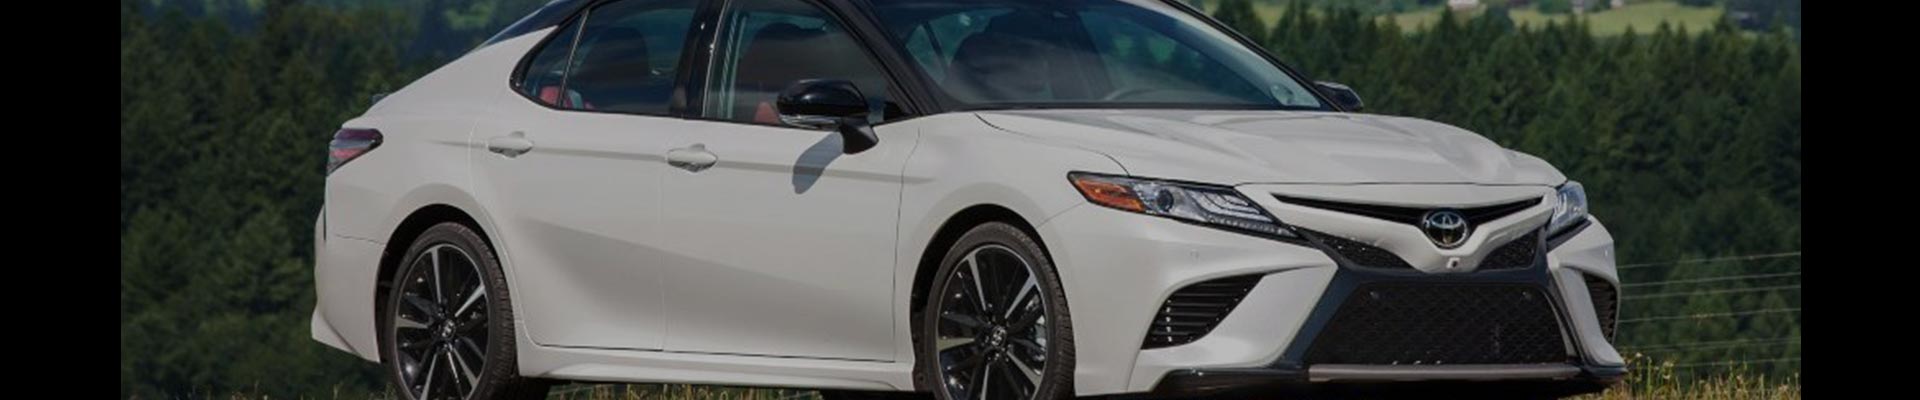 Shop Replacement and OEM Toyota Camry Parts with Discounted Price on the Net